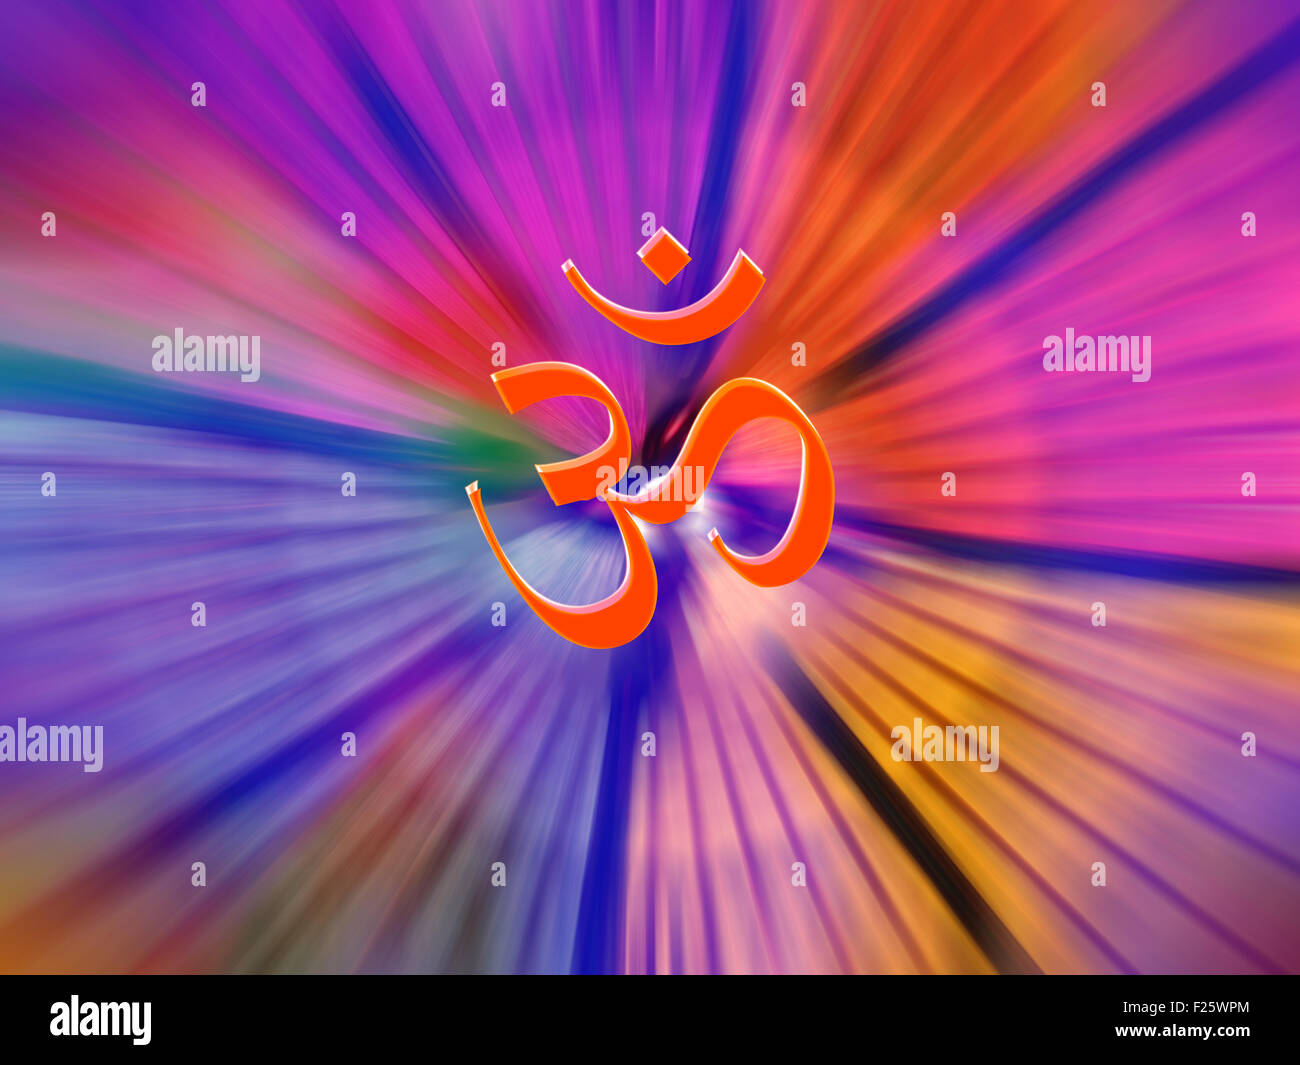 A metaphorical image of the holy Hindu symbol of Aum or OM radiating energies. Stock Photo